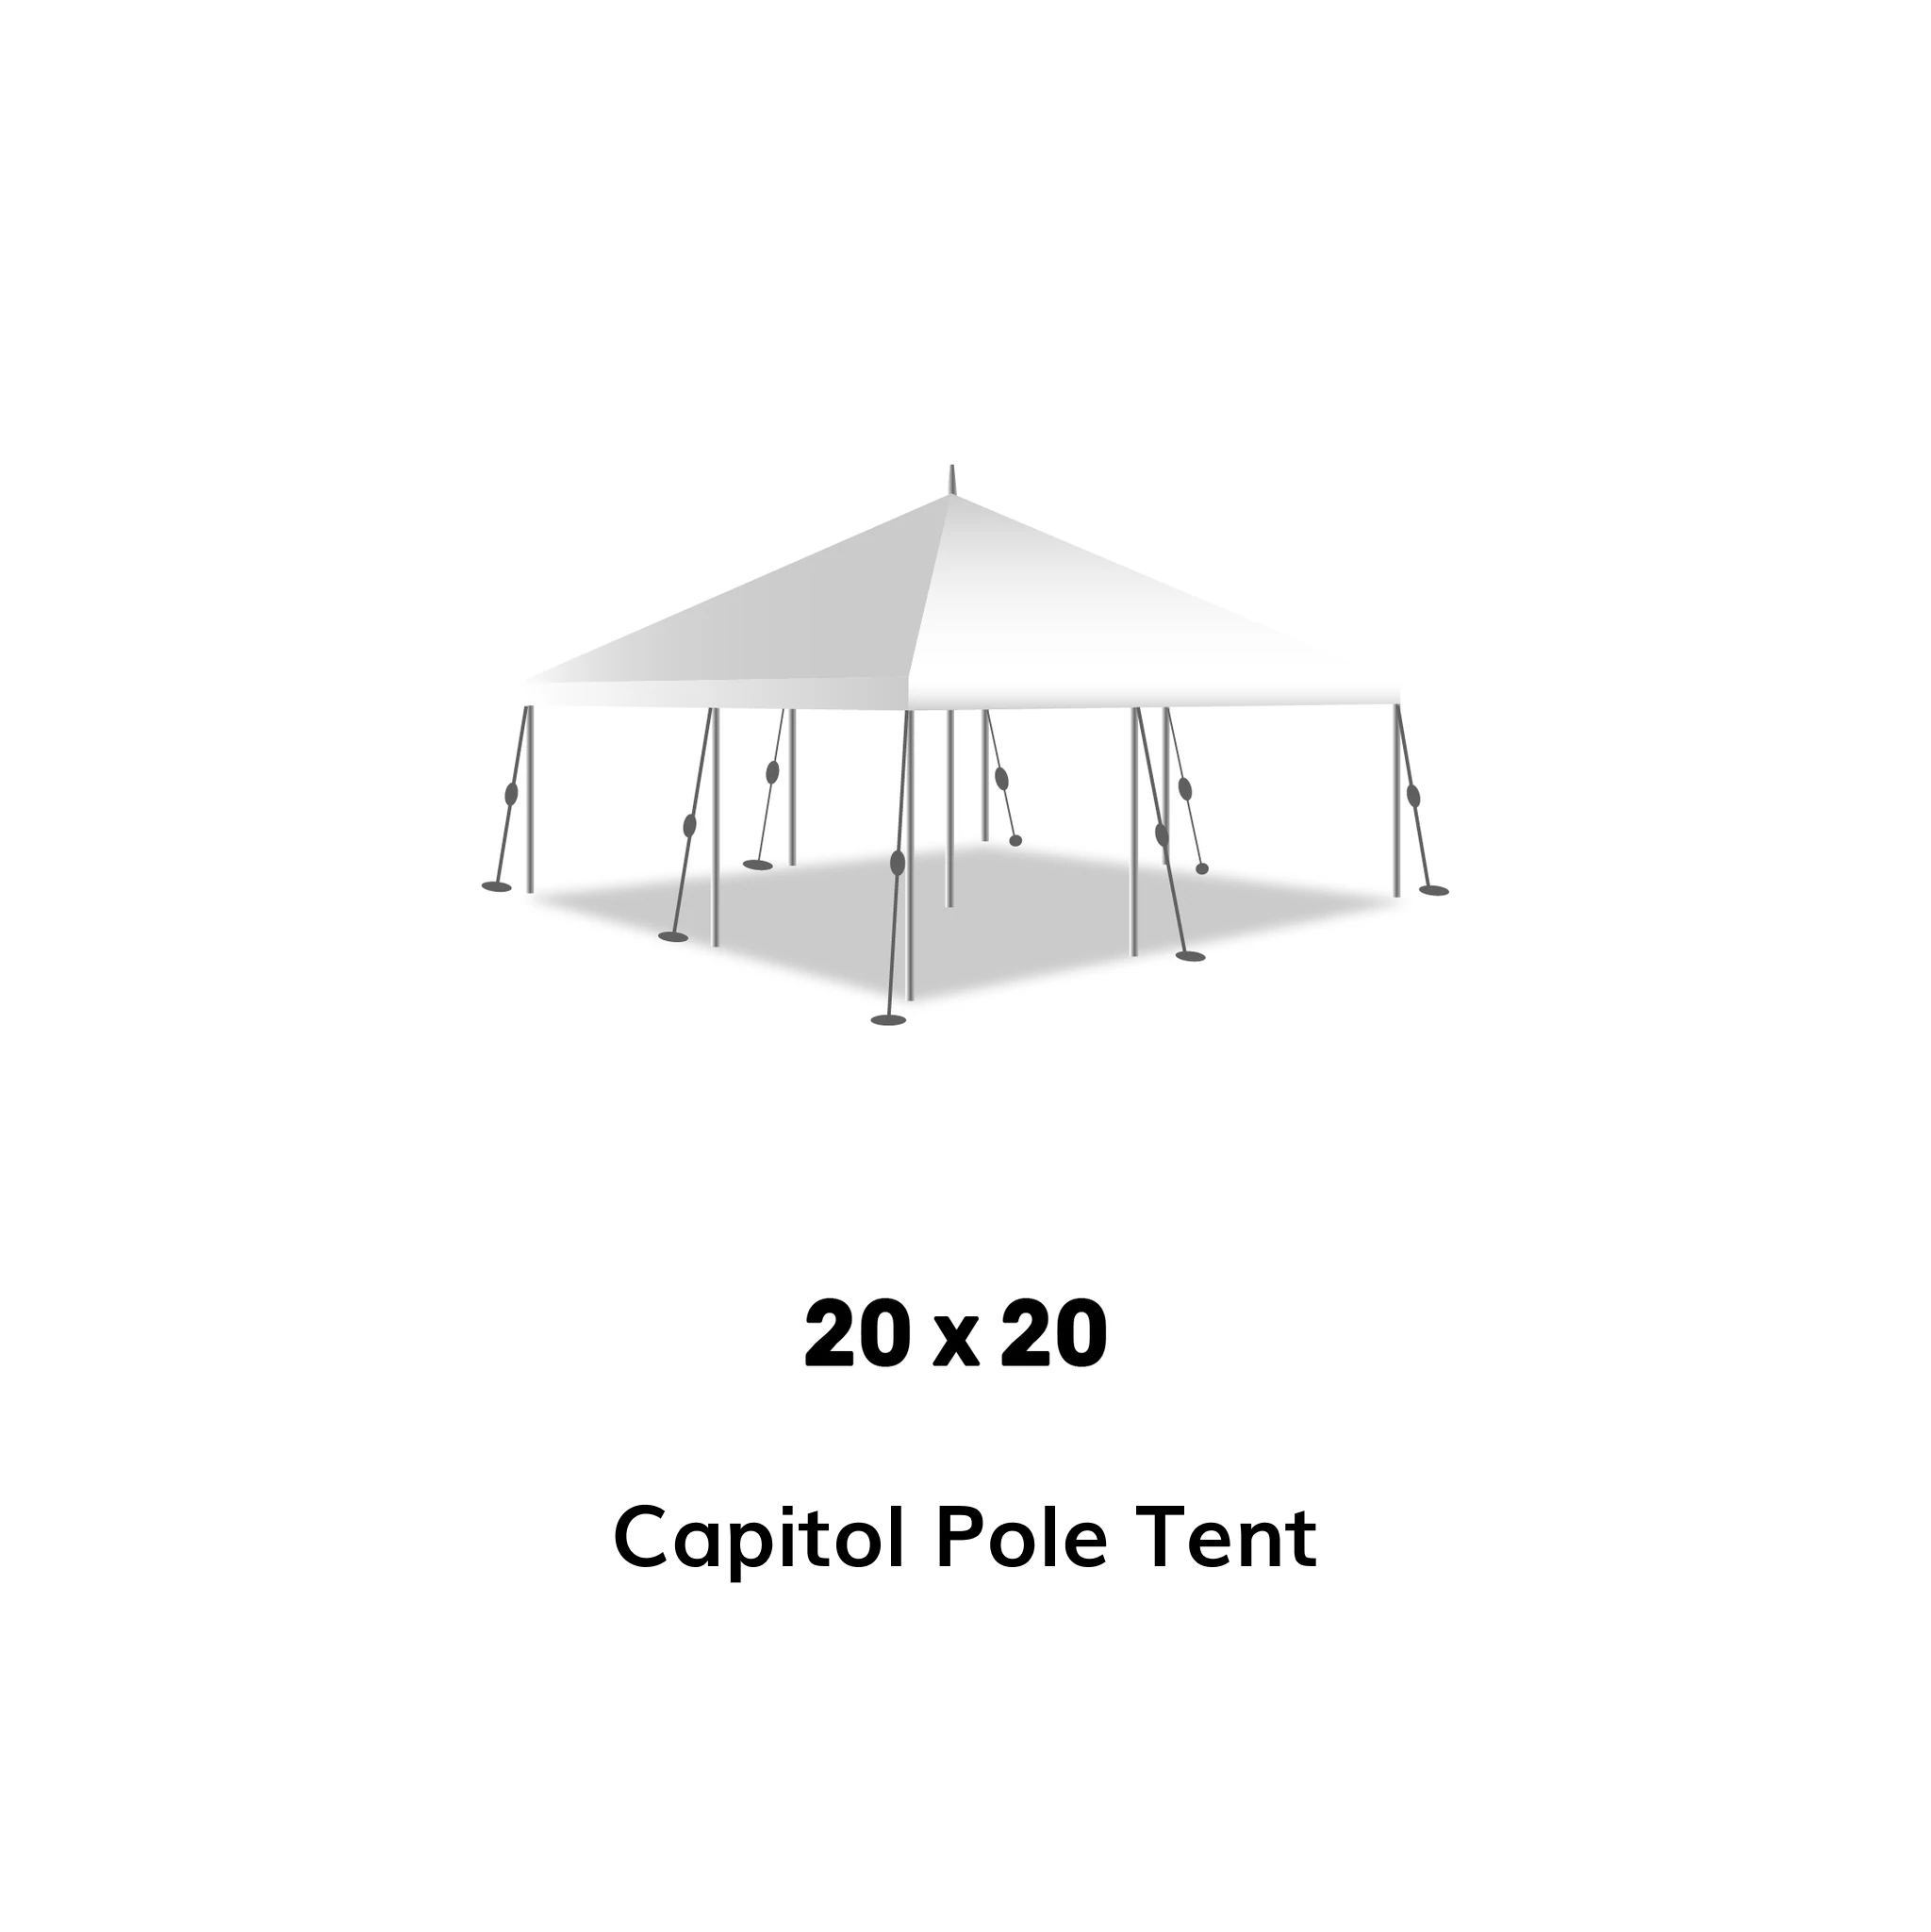 Shelter Your with a & Stylish Pole Tent